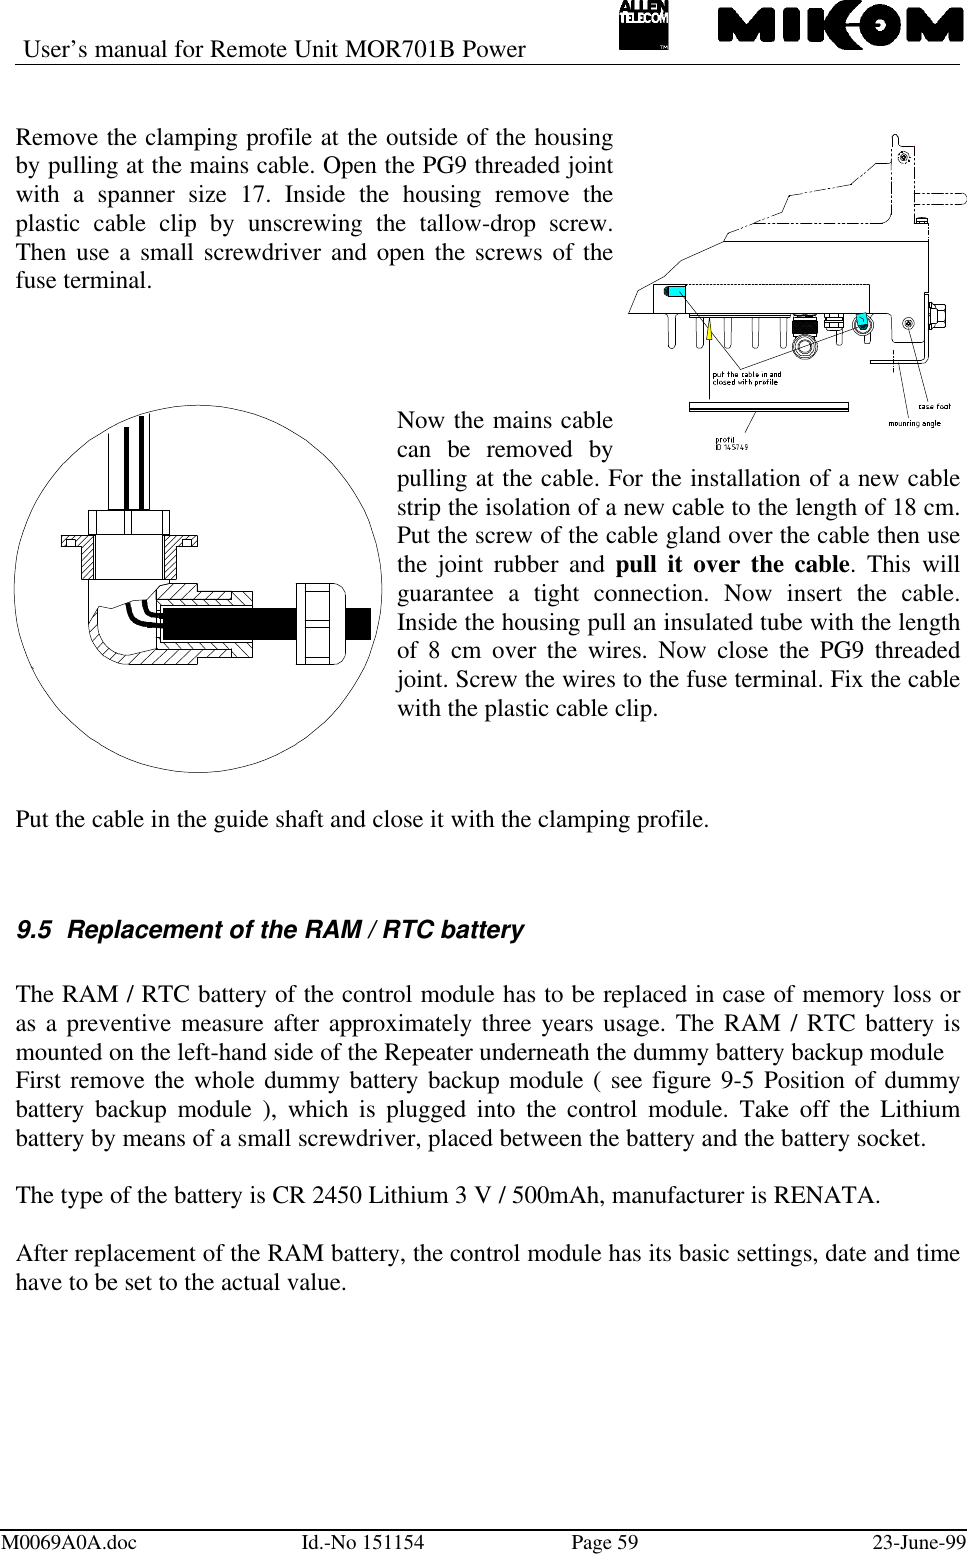 User’s manual for Remote Unit MOR701B PowerM0069A0A.doc Id.-No 151154 Page 59 23-June-99Remove the clamping profile at the outside of the housingby pulling at the mains cable. Open the PG9 threaded jointwith a spanner size 17. Inside the housing remove theplastic cable clip by unscrewing the tallow-drop screw.Then use a small screwdriver and open the screws of thefuse terminal.Now the mains cablecan be removed bypulling at the cable. For the installation of a new cablestrip the isolation of a new cable to the length of 18 cm.Put the screw of the cable gland over the cable then usethe joint rubber and pull it over the cable. This willguarantee a tight connection. Now insert the cable.Inside the housing pull an insulated tube with the lengthof 8 cm over the wires. Now close the PG9 threadedjoint. Screw the wires to the fuse terminal. Fix the cablewith the plastic cable clip.Put the cable in the guide shaft and close it with the clamping profile.9.5 Replacement of the RAM / RTC batteryThe RAM / RTC battery of the control module has to be replaced in case of memory loss oras a preventive measure after approximately three years usage. The RAM / RTC battery ismounted on the left-hand side of the Repeater underneath the dummy battery backup moduleFirst remove the whole dummy battery backup module ( see figure 9-5 Position of dummybattery backup module ), which is plugged into the control module. Take off the Lithiumbattery by means of a small screwdriver, placed between the battery and the battery socket.The type of the battery is CR 2450 Lithium 3 V / 500mAh, manufacturer is RENATA.After replacement of the RAM battery, the control module has its basic settings, date and timehave to be set to the actual value.